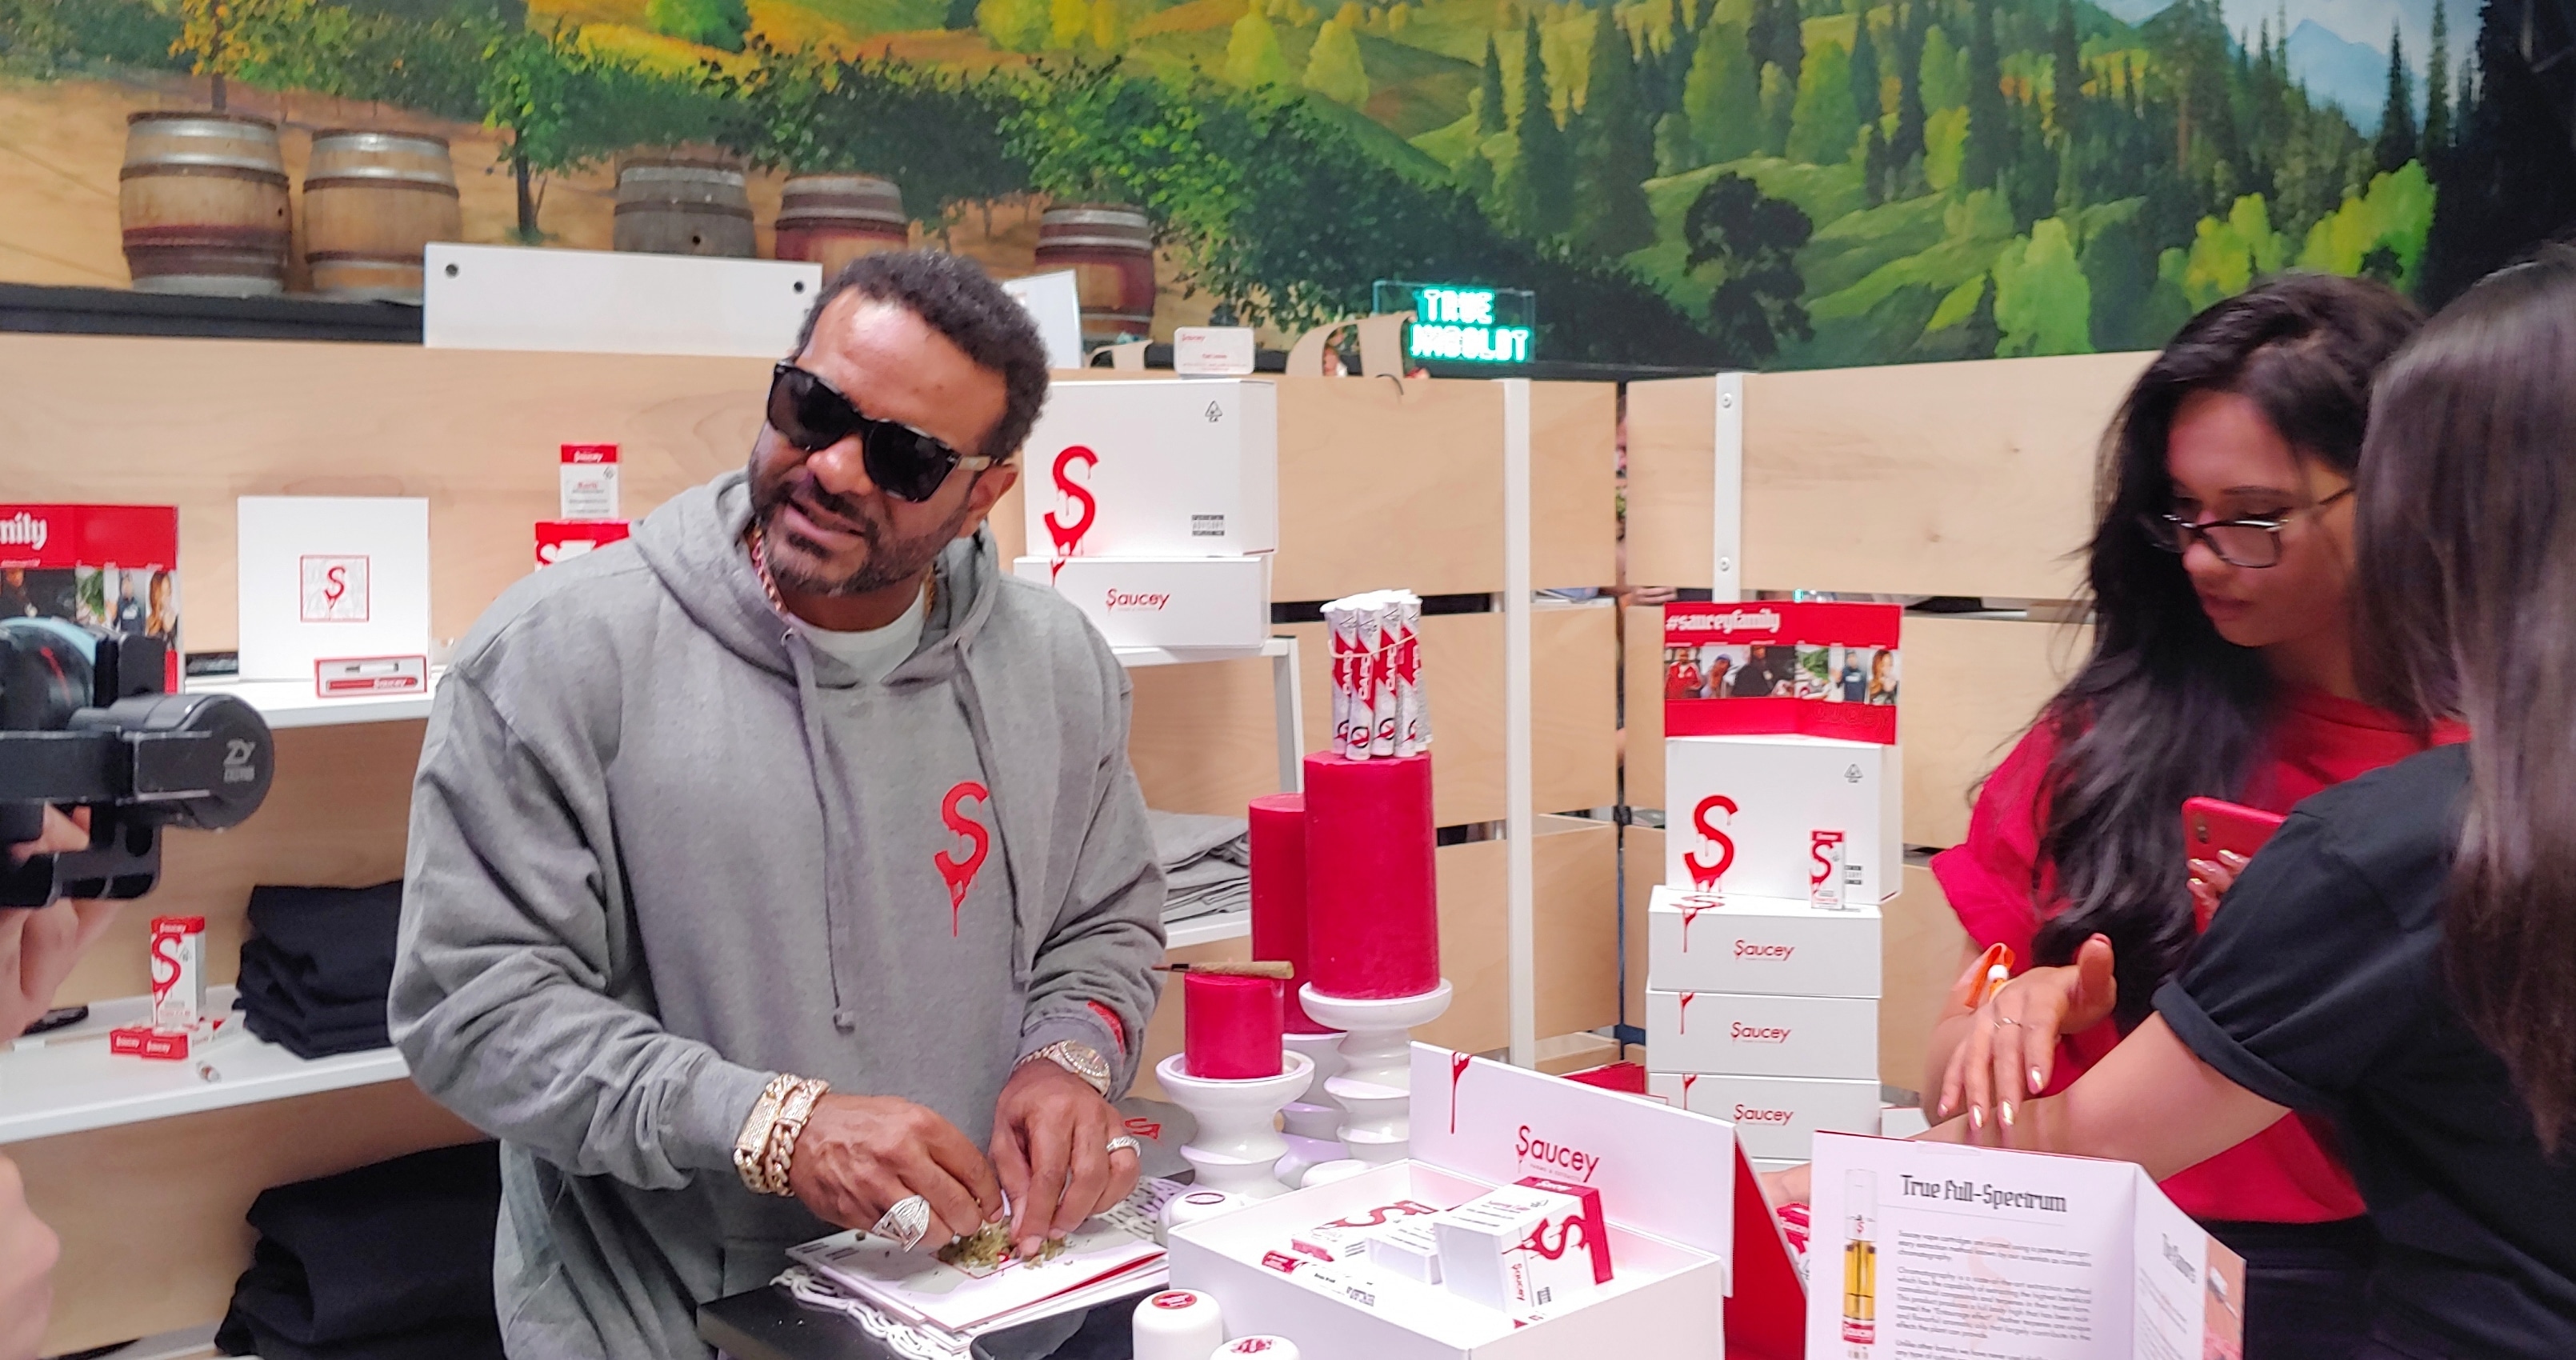 Jim Jones and Alex Todd drop "CAPO Blunts as part of Saucey Farms ad Extracts portfolio